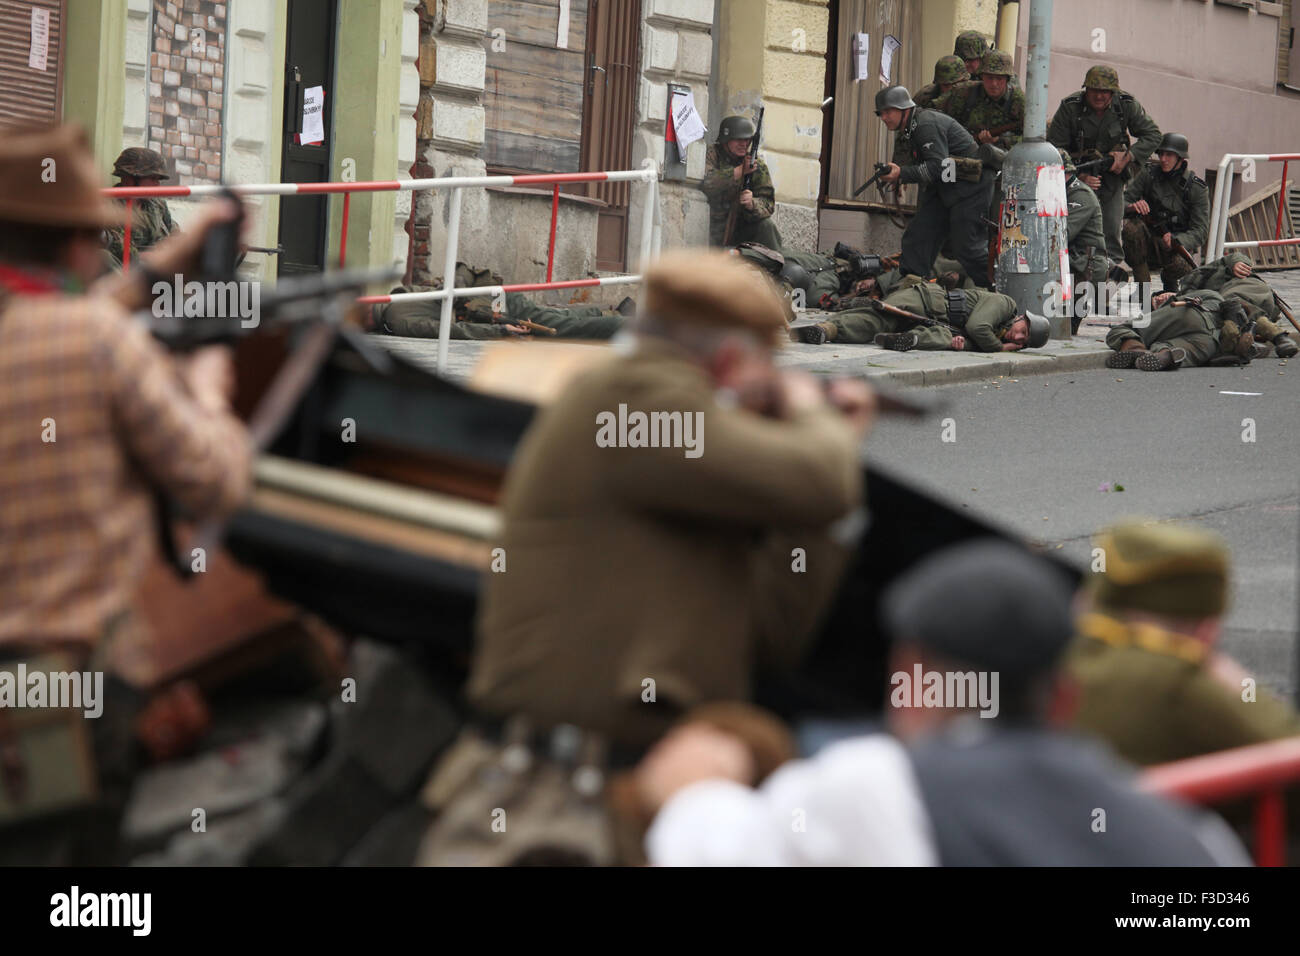 Reenactors dressed as the Czech insurgents defend a barricade against the German Nazi troops during the reenactment of the 1945 Prague uprising in Prague, Czech Republic, on May 9, 2015. Stock Photo